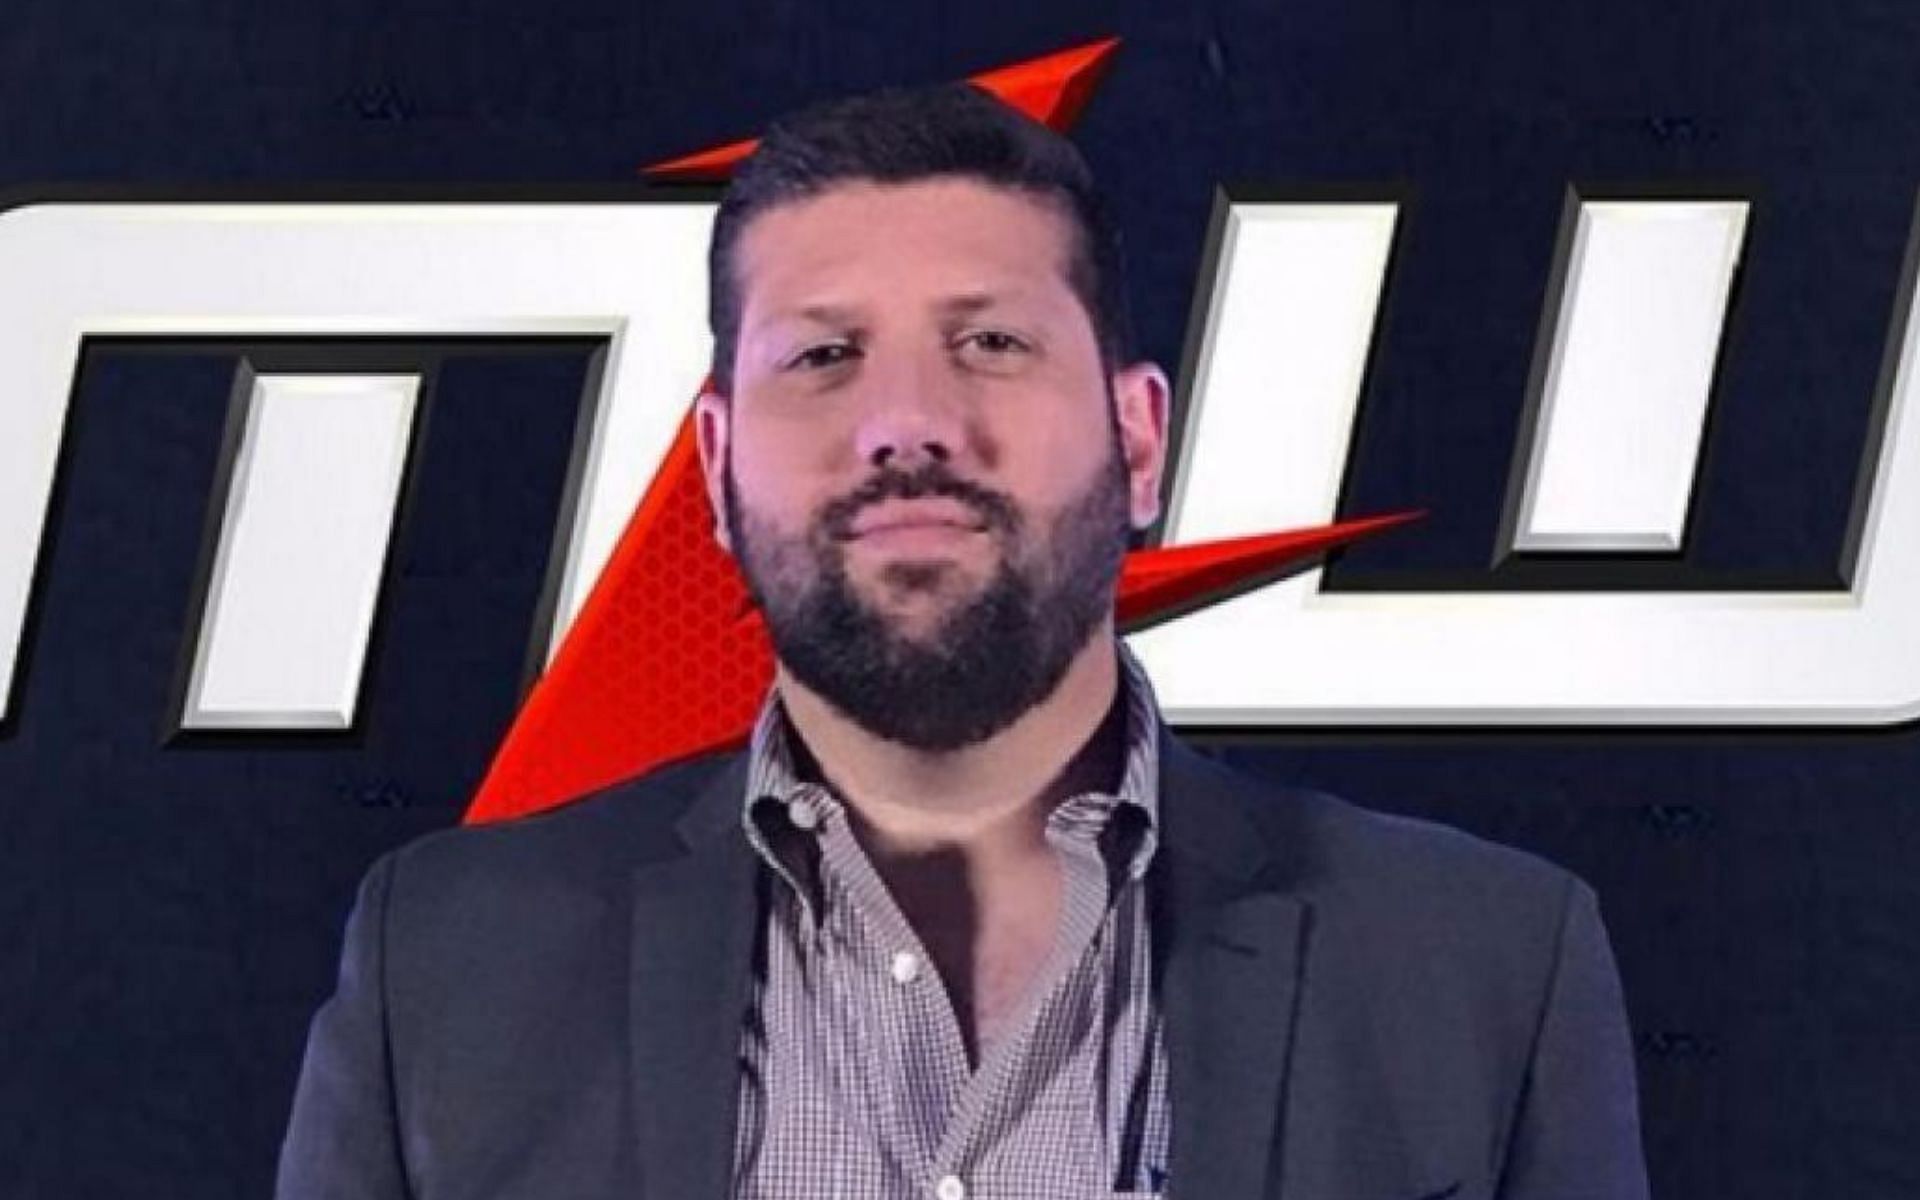 MLW CEO and former WCW announcer, Court Bauer